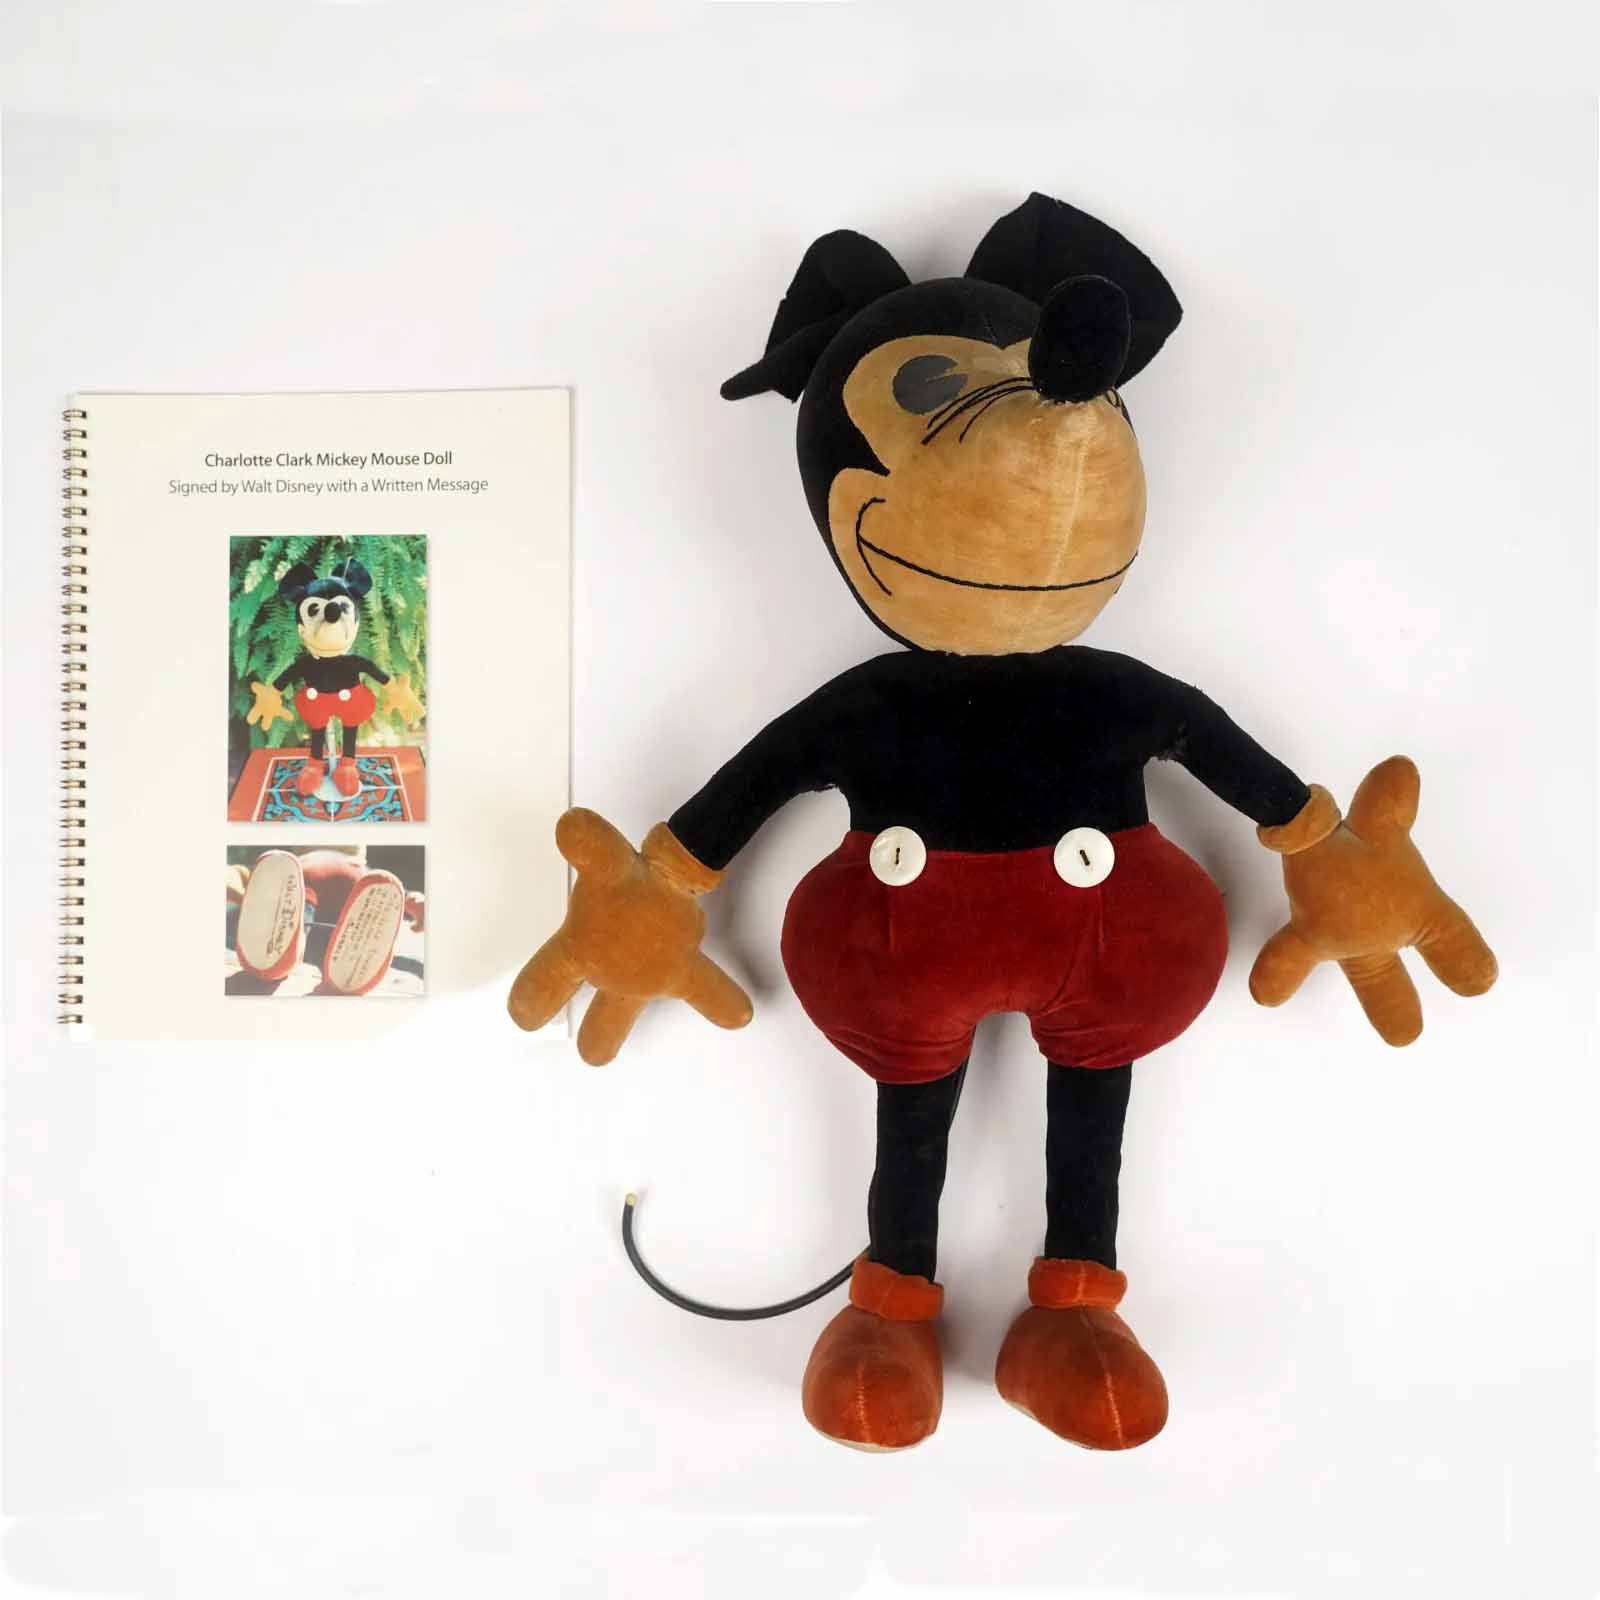 David Iwerks collection of Disney and Ub Iwerks items performed admirably at Abell